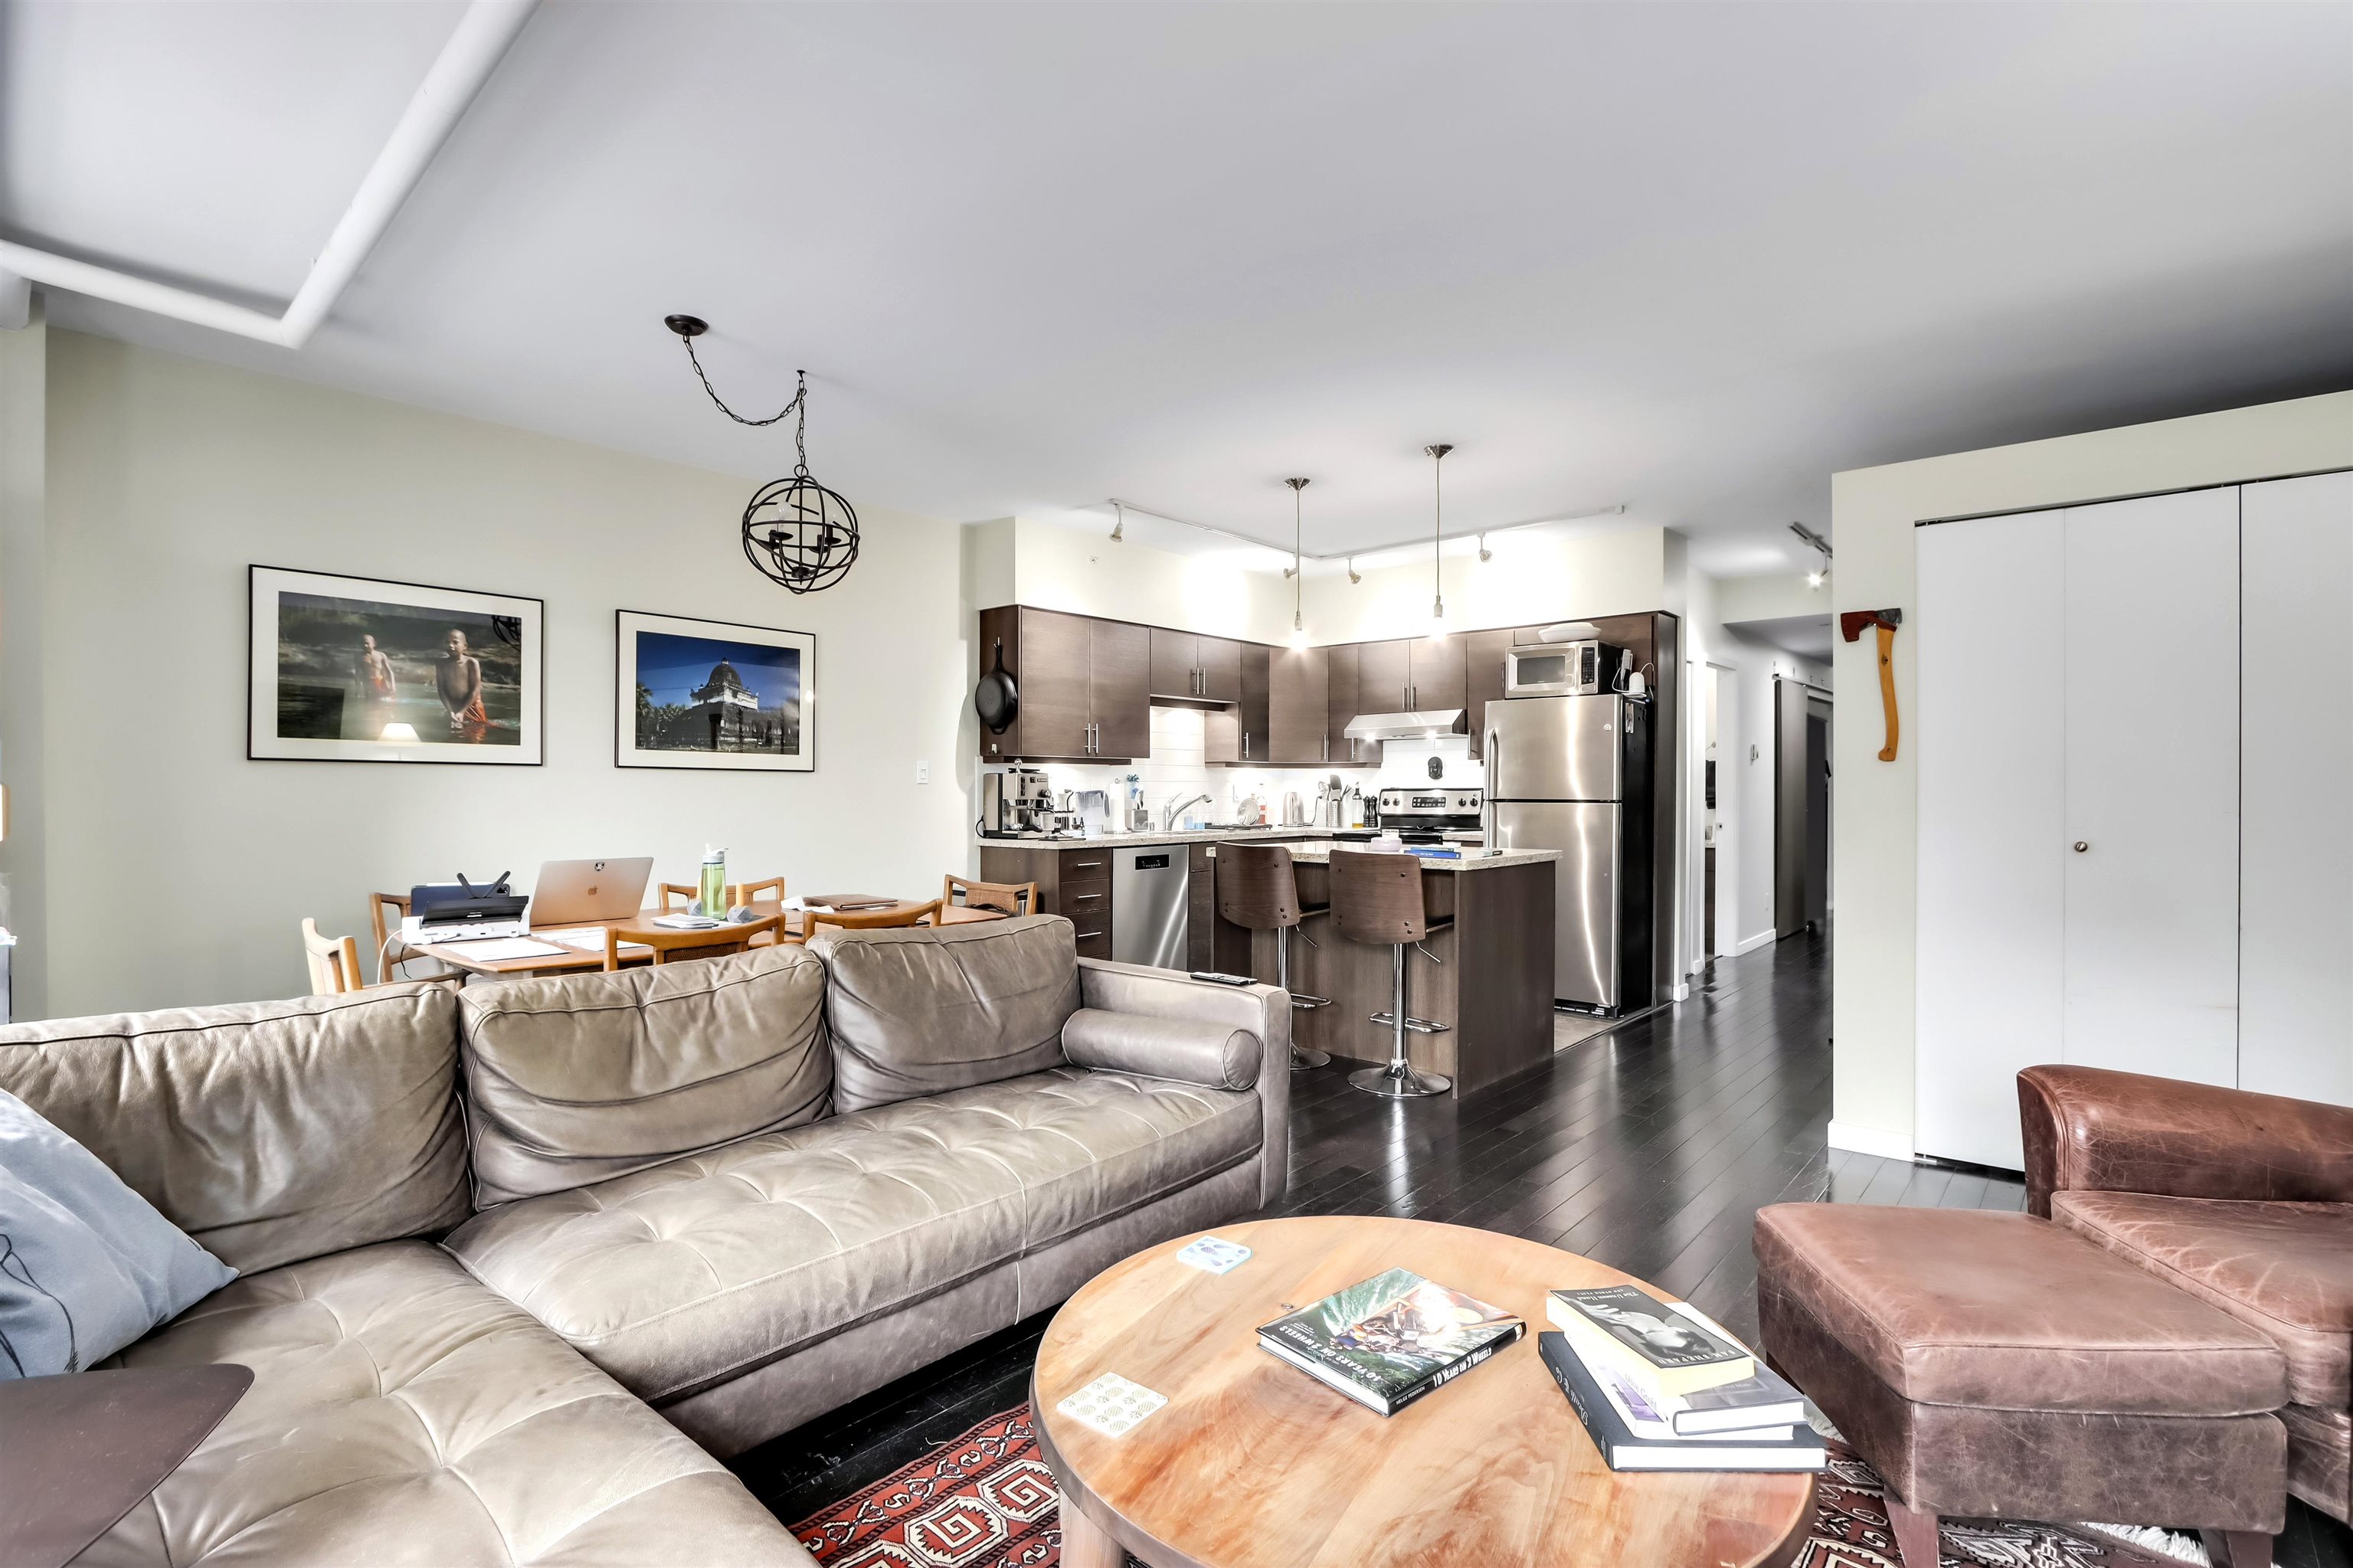 Listing image of 205 88 LONSDALE AVENUE